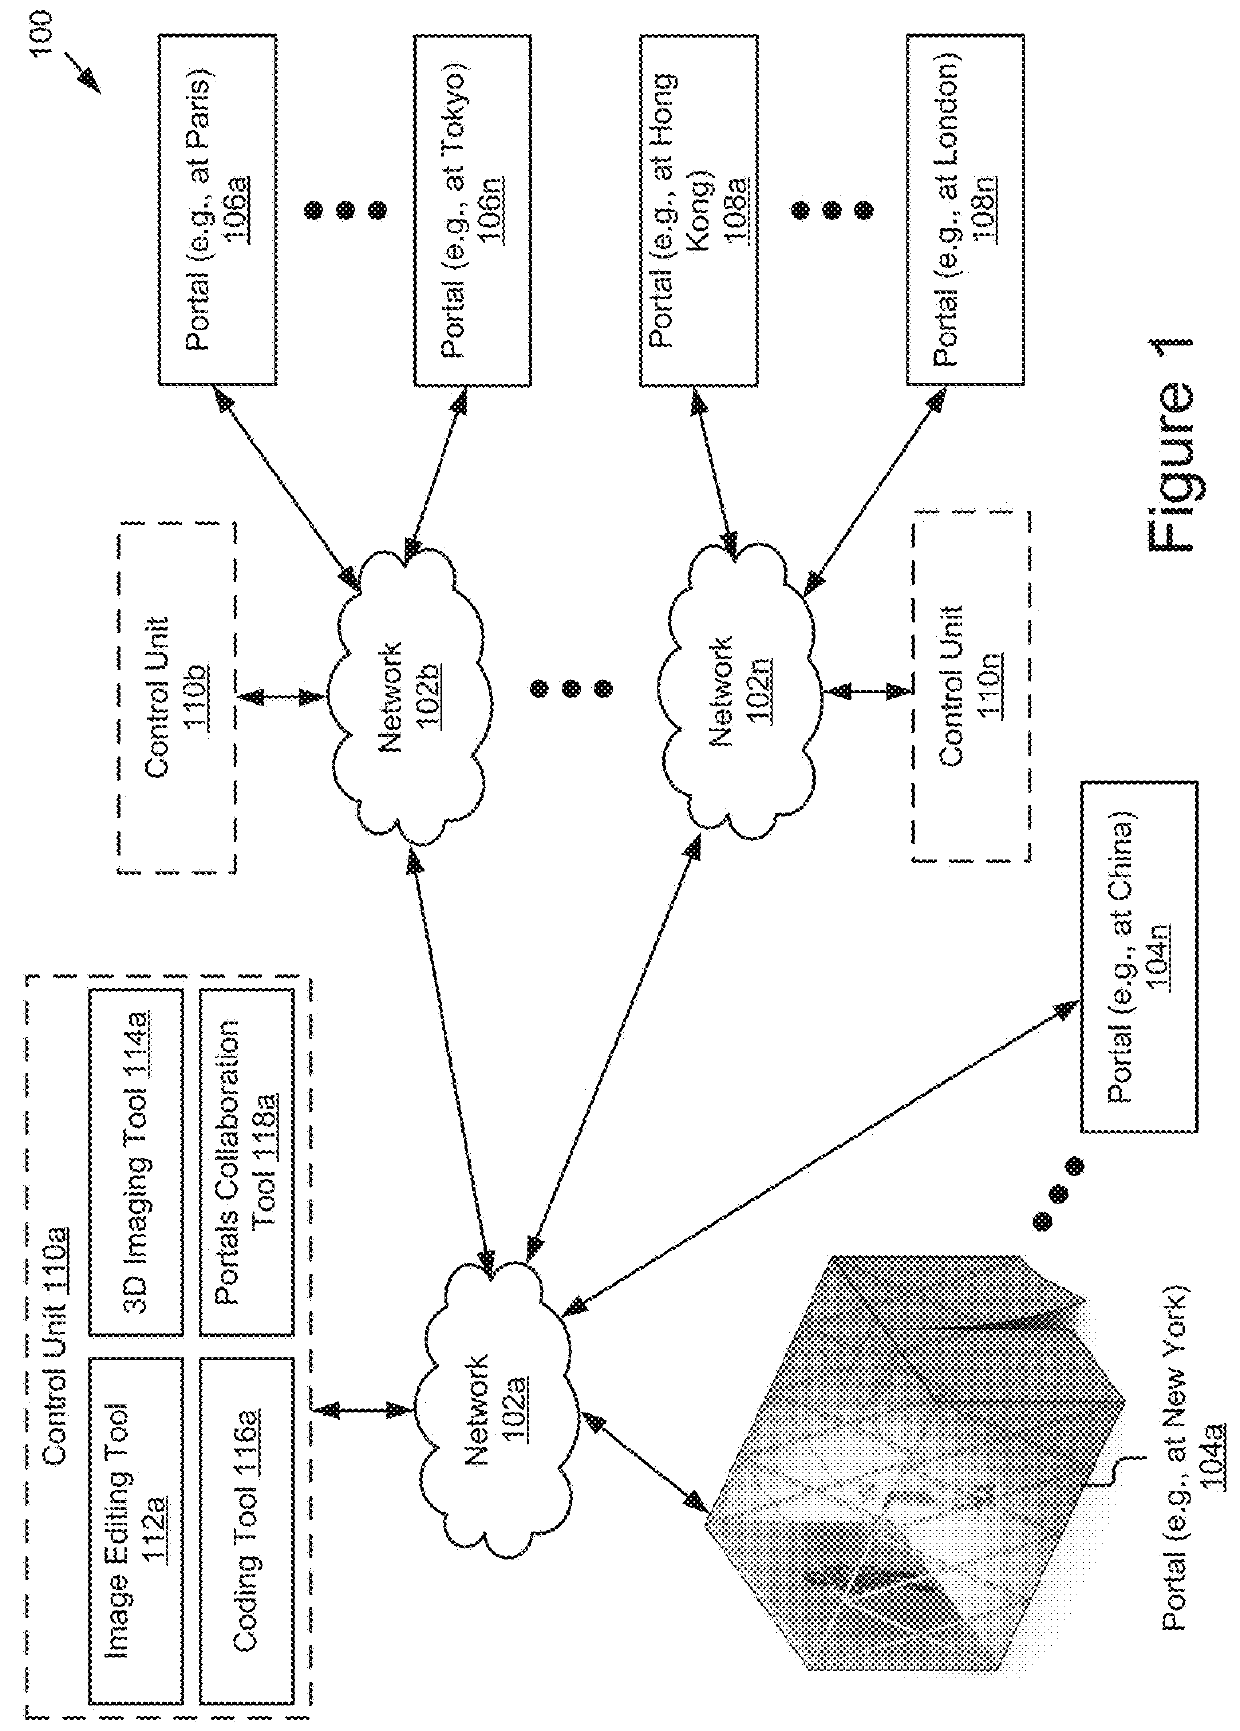 Network architecture for immersive audio-visual communications by temporary communication structures